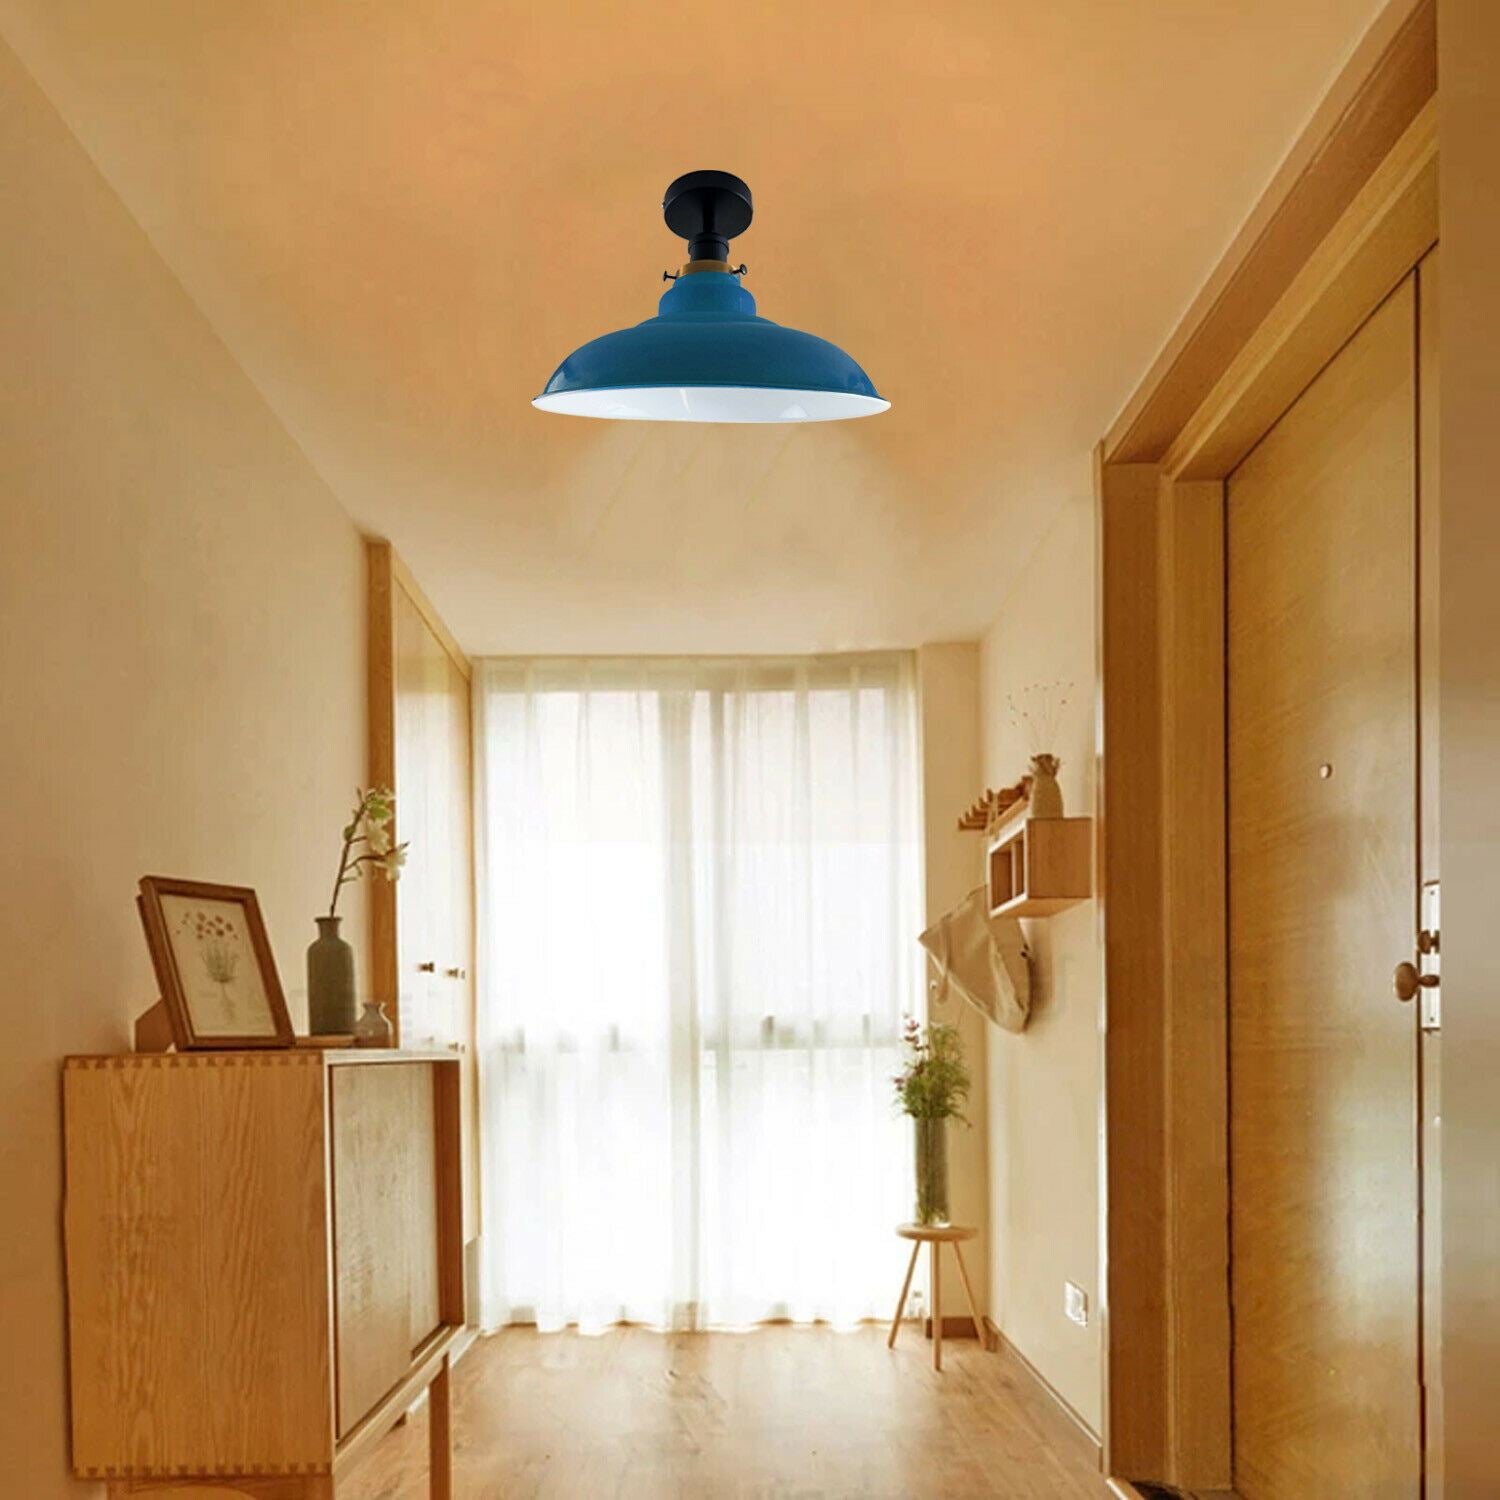  Indoor Light Fitting For Bed room